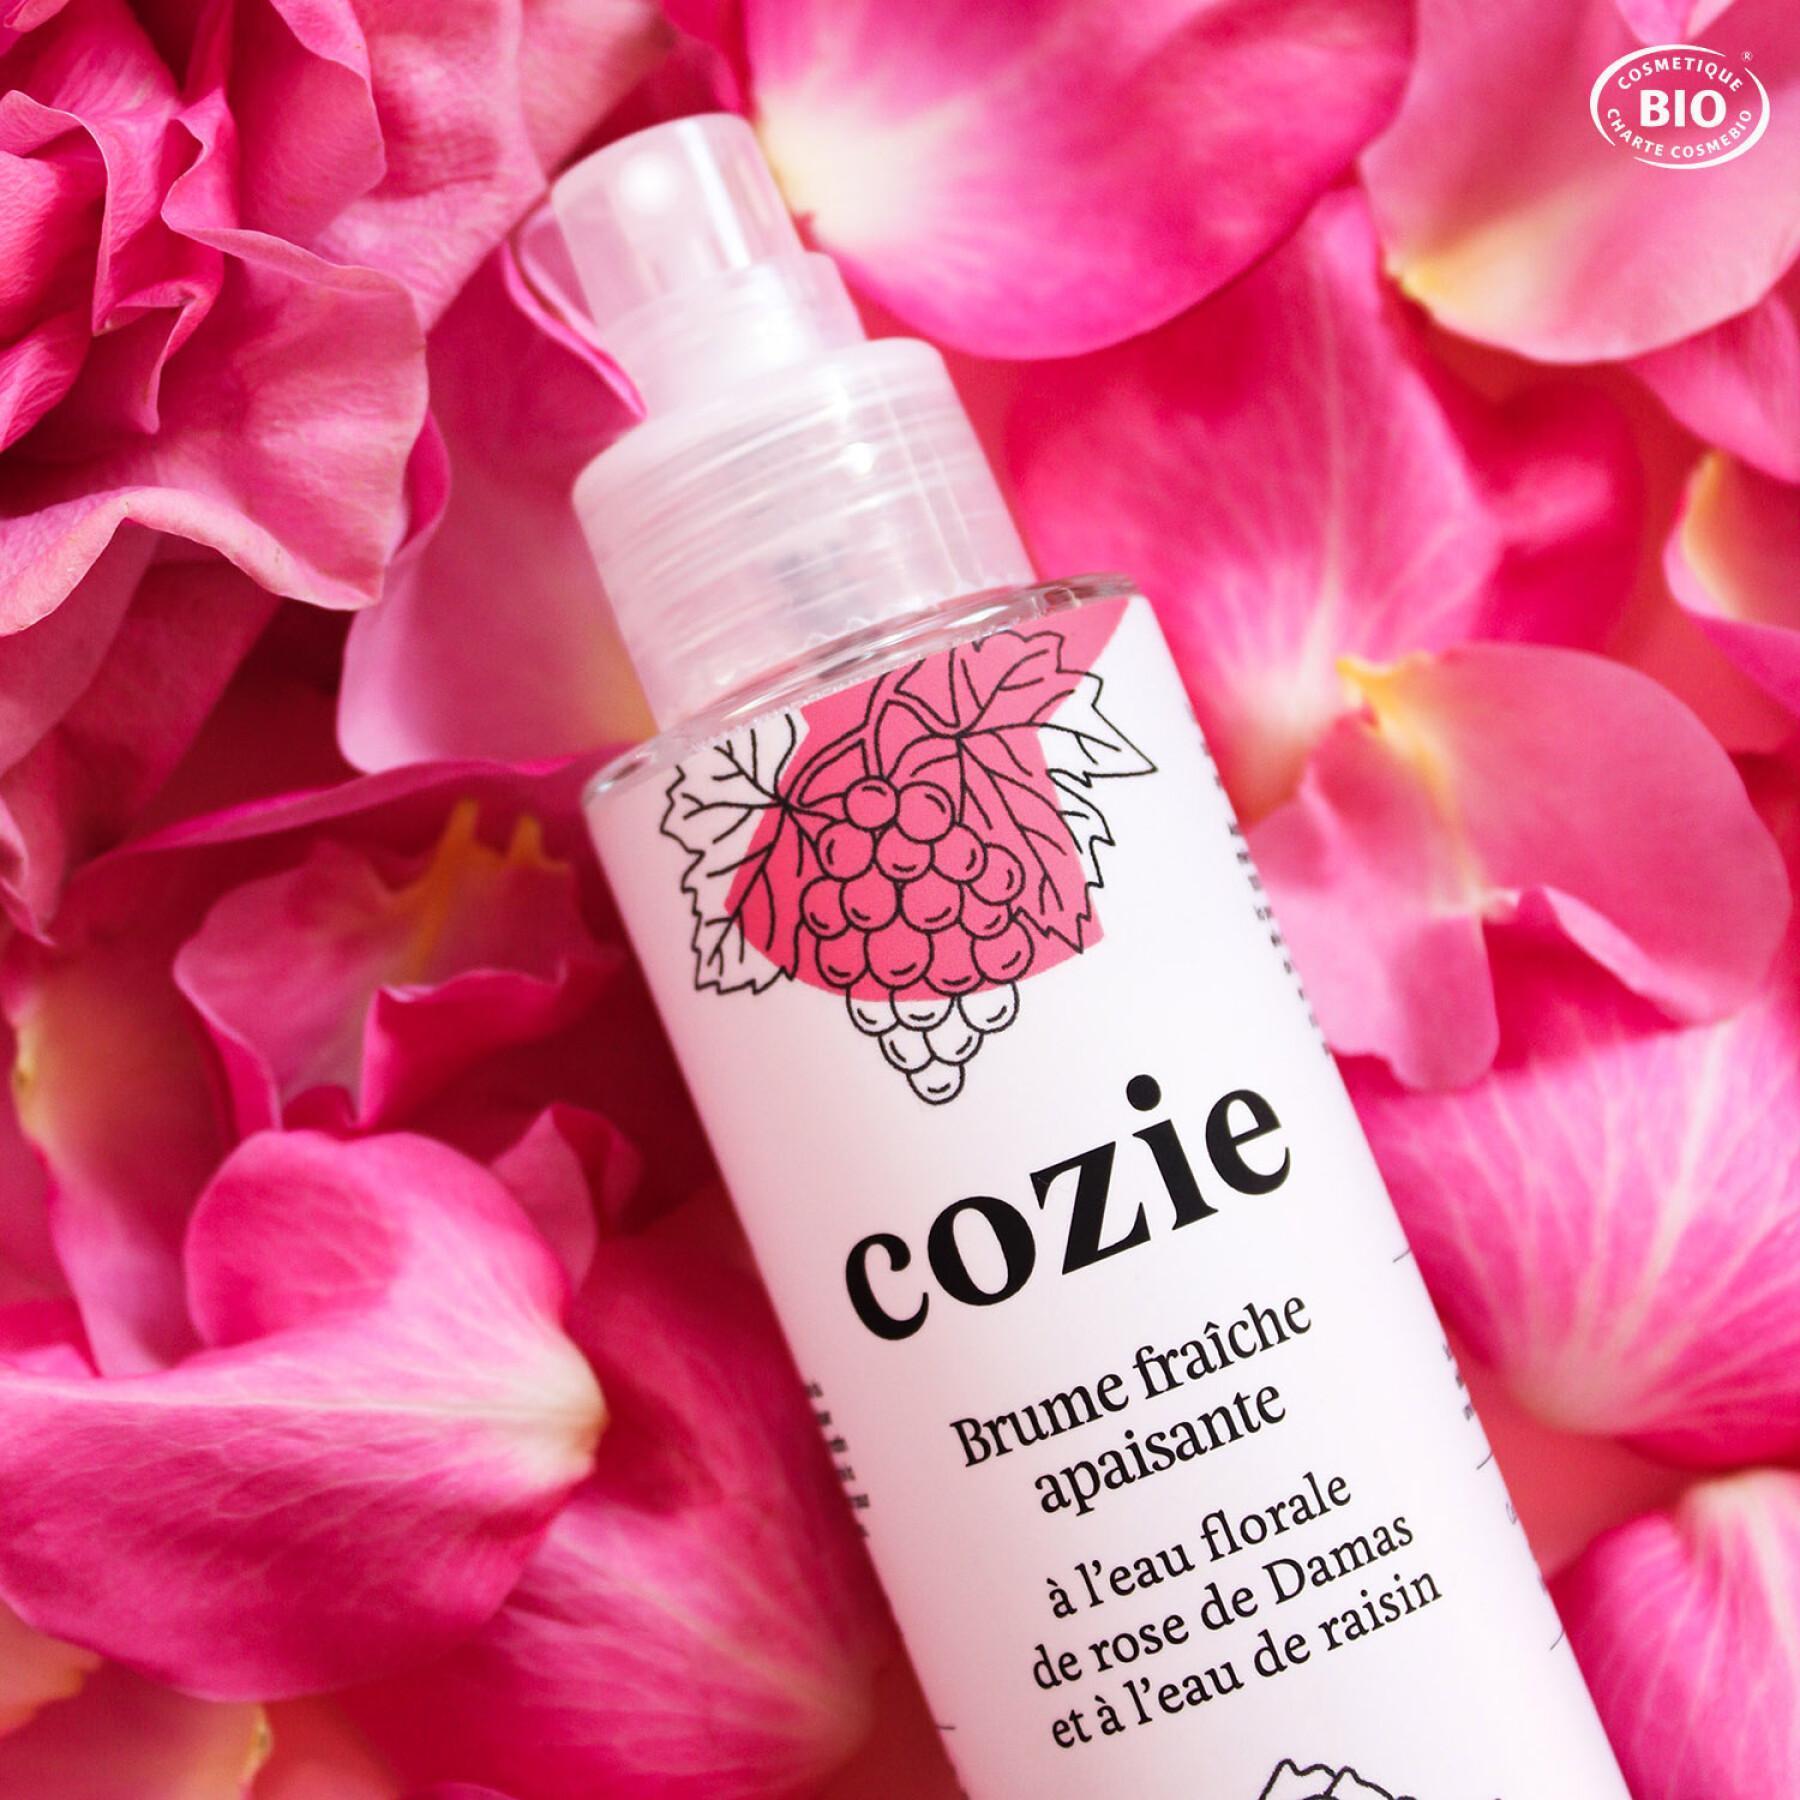 Fresh soothing mist with rose floral water and grape water Cozie 100ml